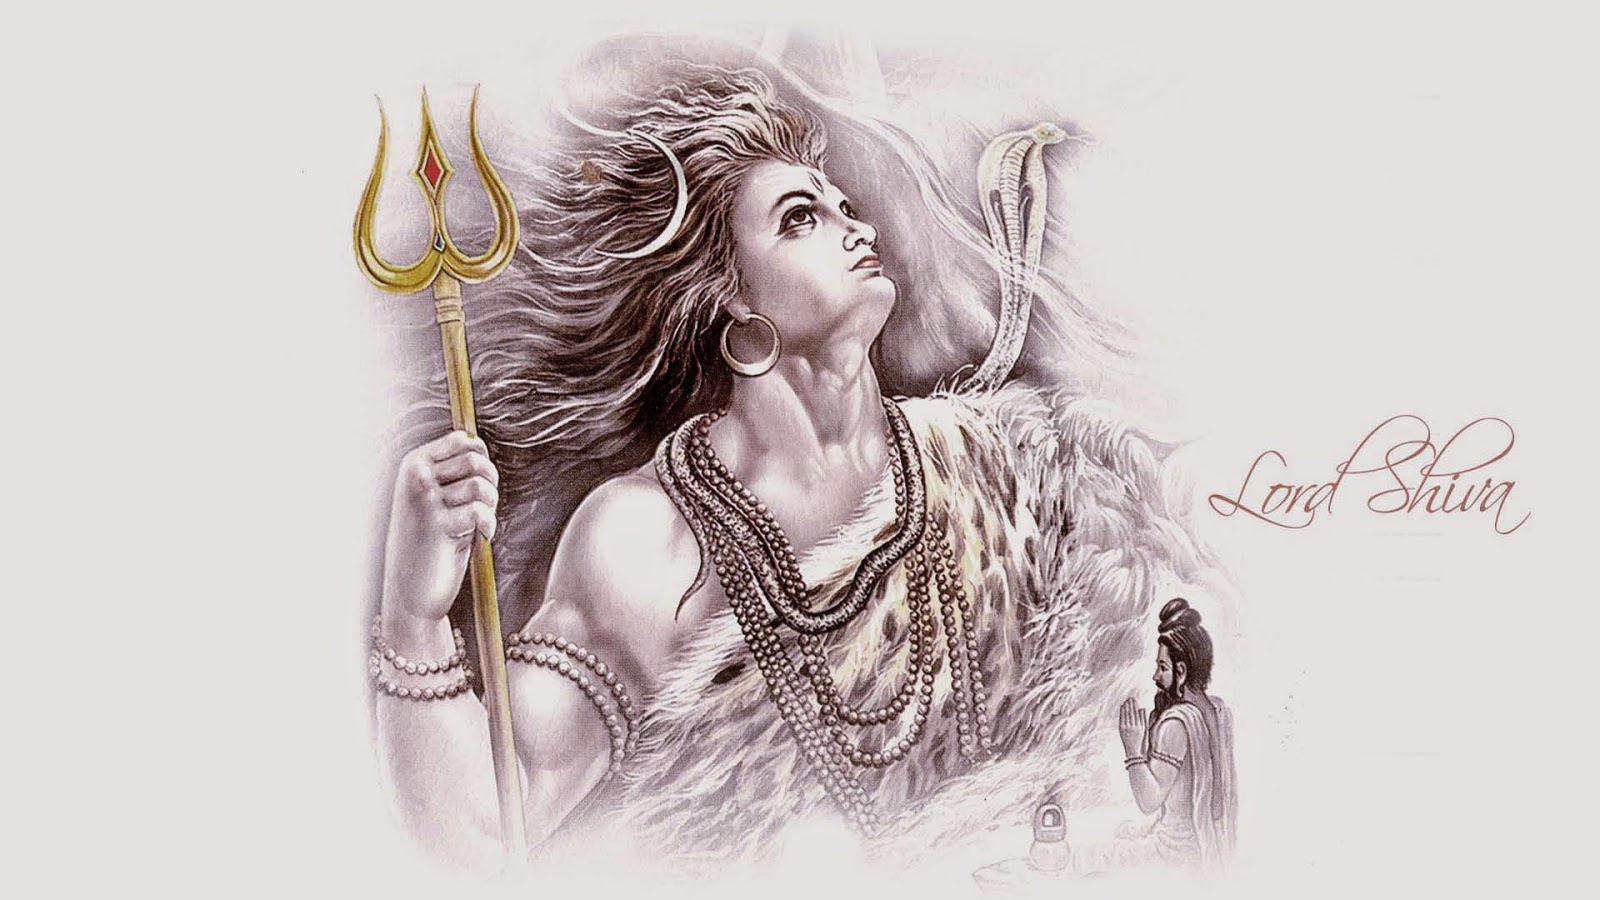 Lord Shiva Rudra Avatar Images Wallpapers Free Download